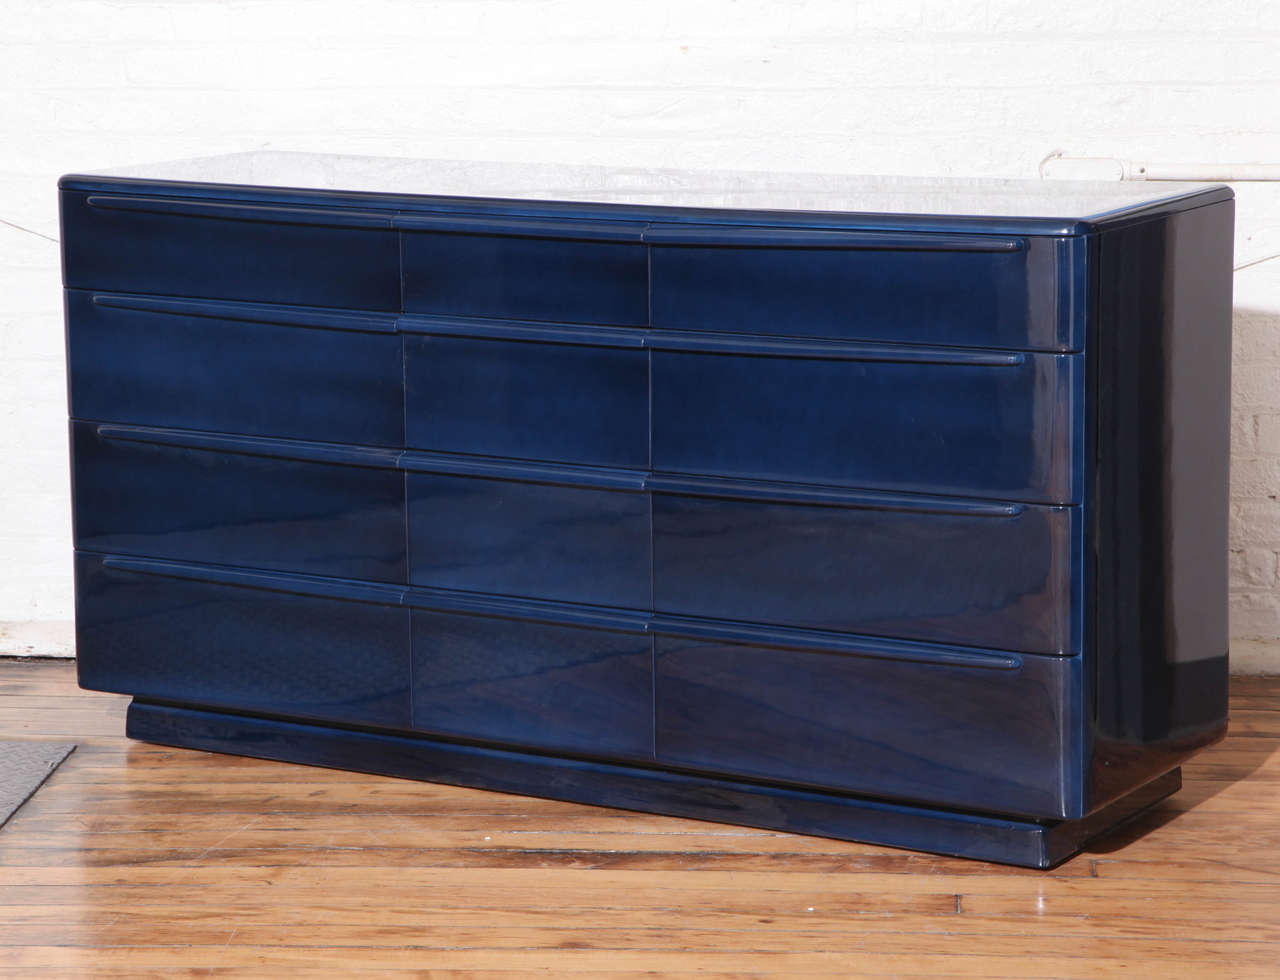 A sideboard/dresser/chest of drawers. Lacquered midnight blue. By Heywood Wakefield